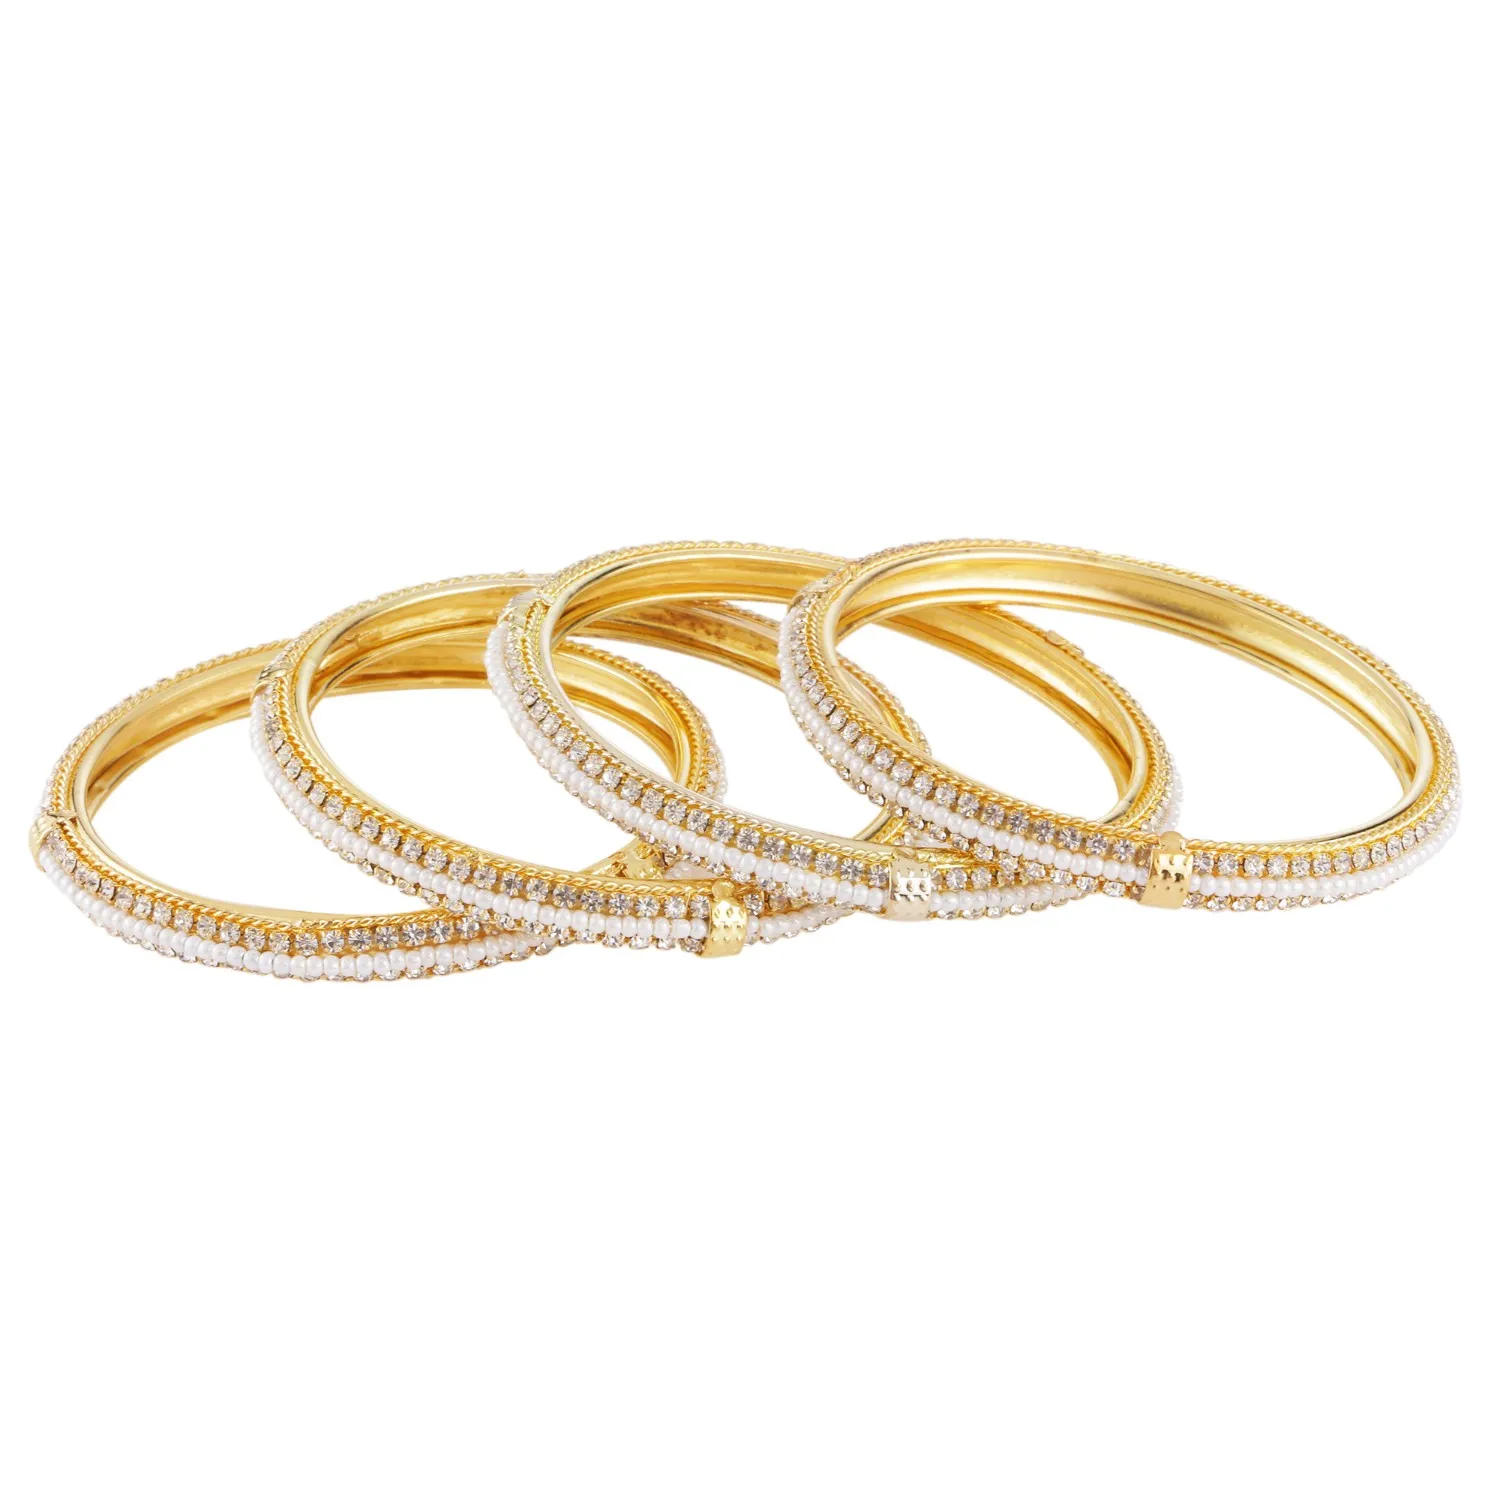 Details about    Bollywood Fashion Style Gold Plated Indian Bangles CZ Stone Partywear Jewellery 